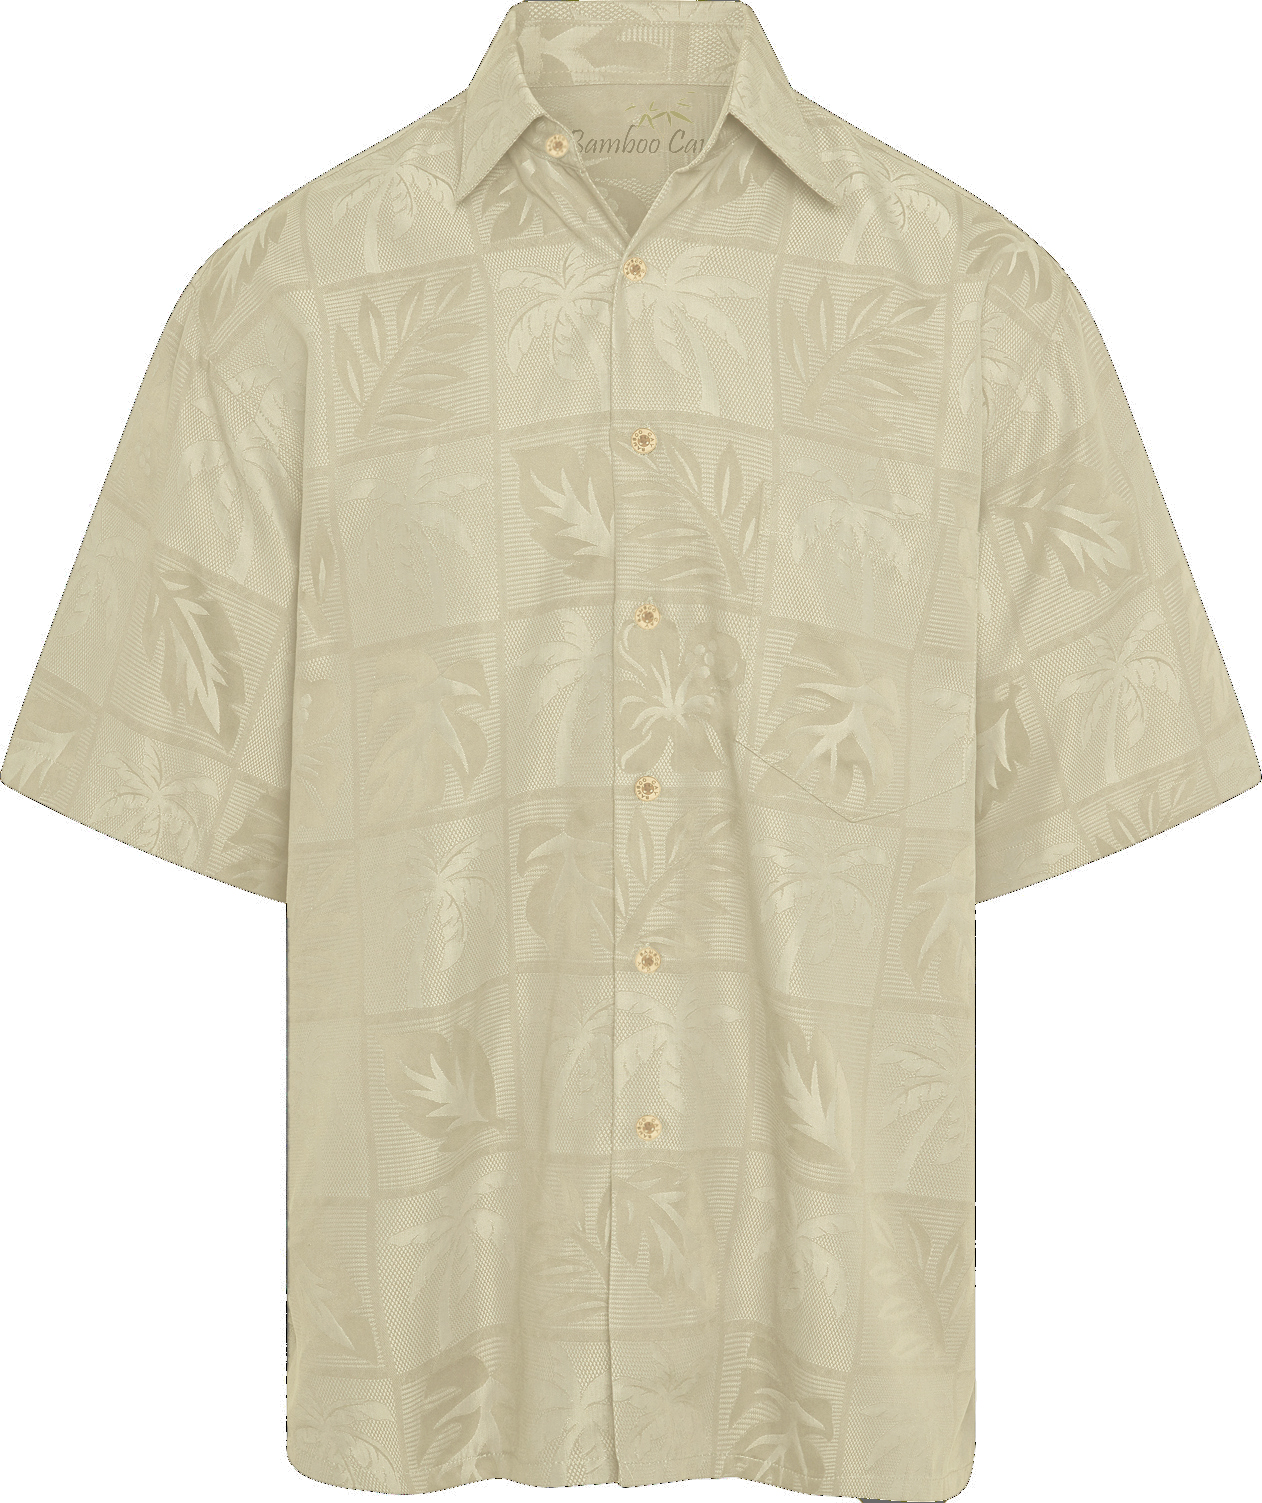 Enjoy the warm breeze with this contemporary weave camp shirt. Jacquard pattern accents this soft and supple fabric. Scotchgard™ finish for easy stain release. Perfect for events; restaurants and patio bars. Embroiders well.